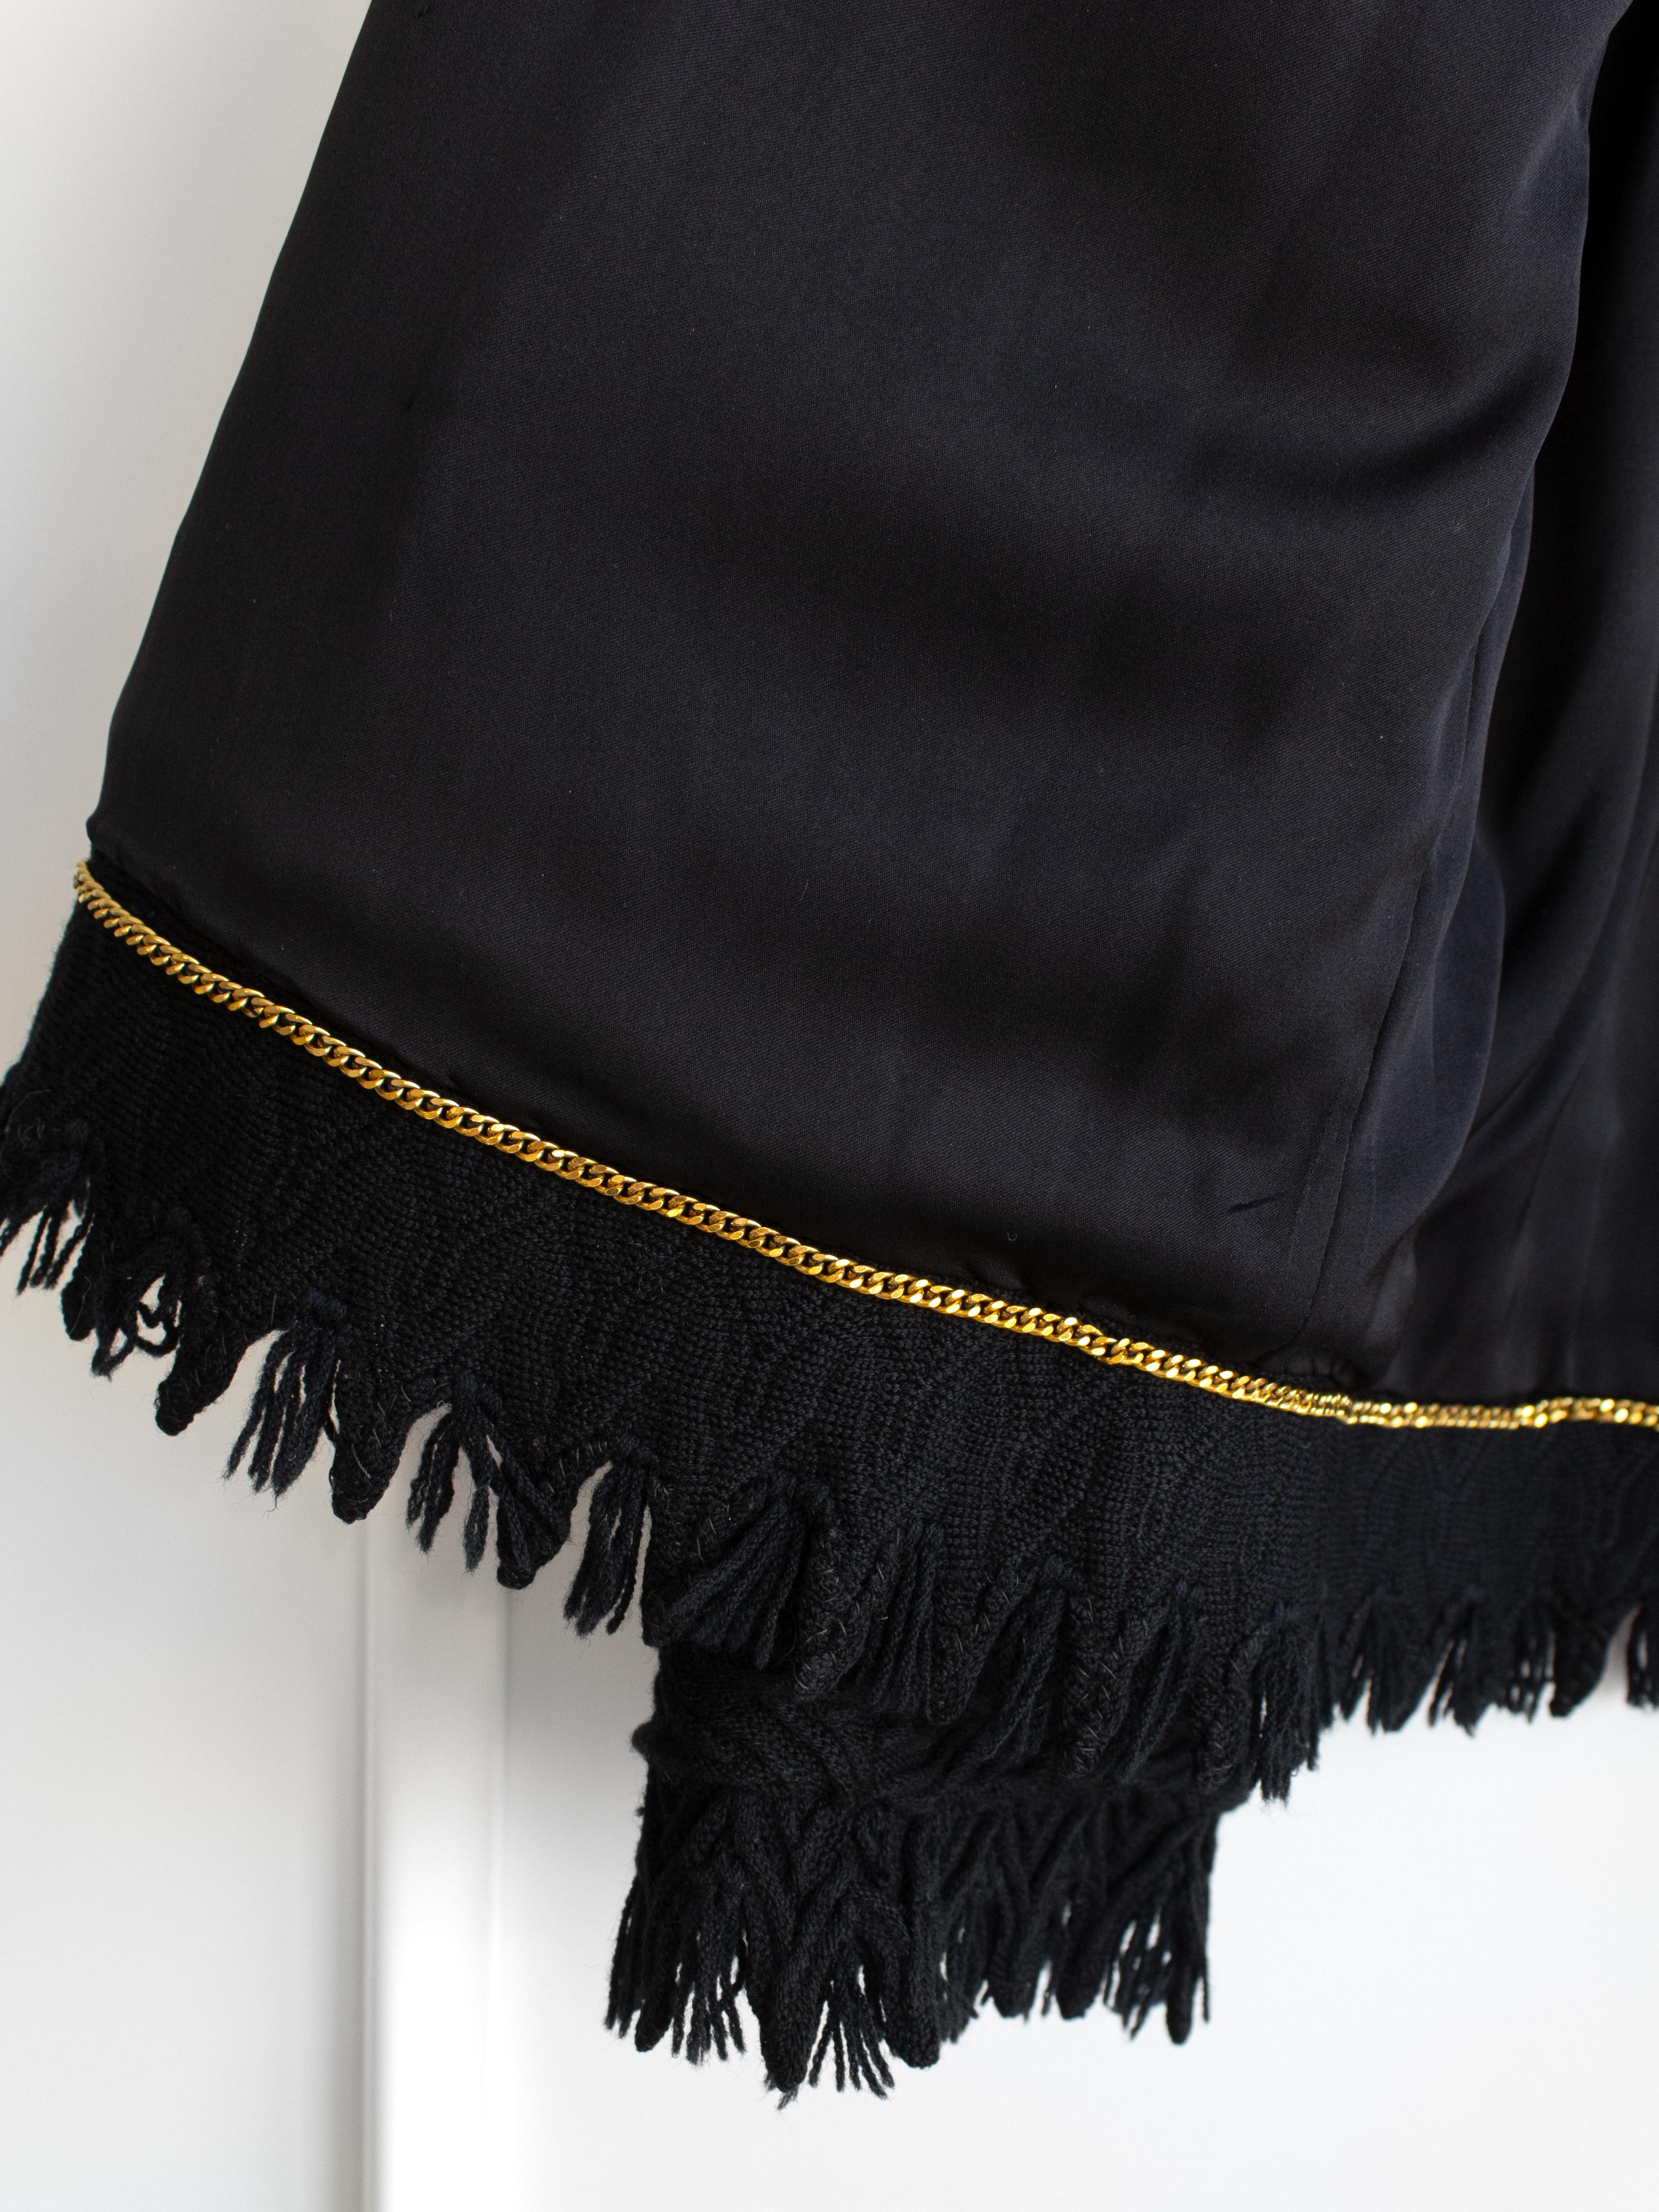 Rare Chanel Haute Couture F/W 1970 Jackie Black Gold CC Fringe LBJ Tweed Jacket For Sale 10